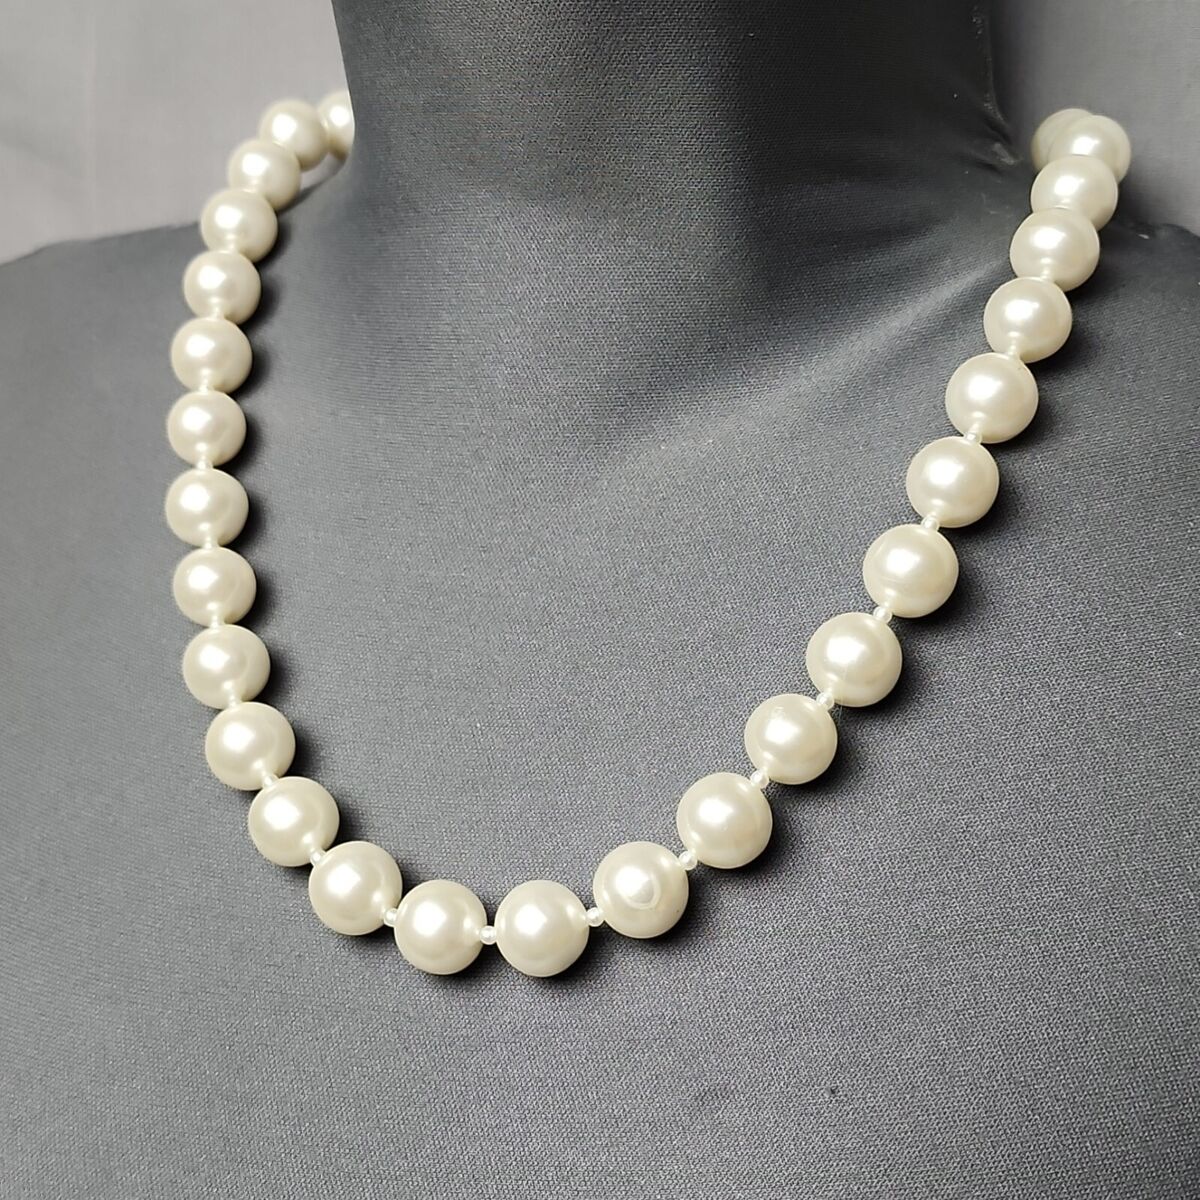 CHANEL Vintage '50s-'60s Large Pearl Choker Necklace For Sale at